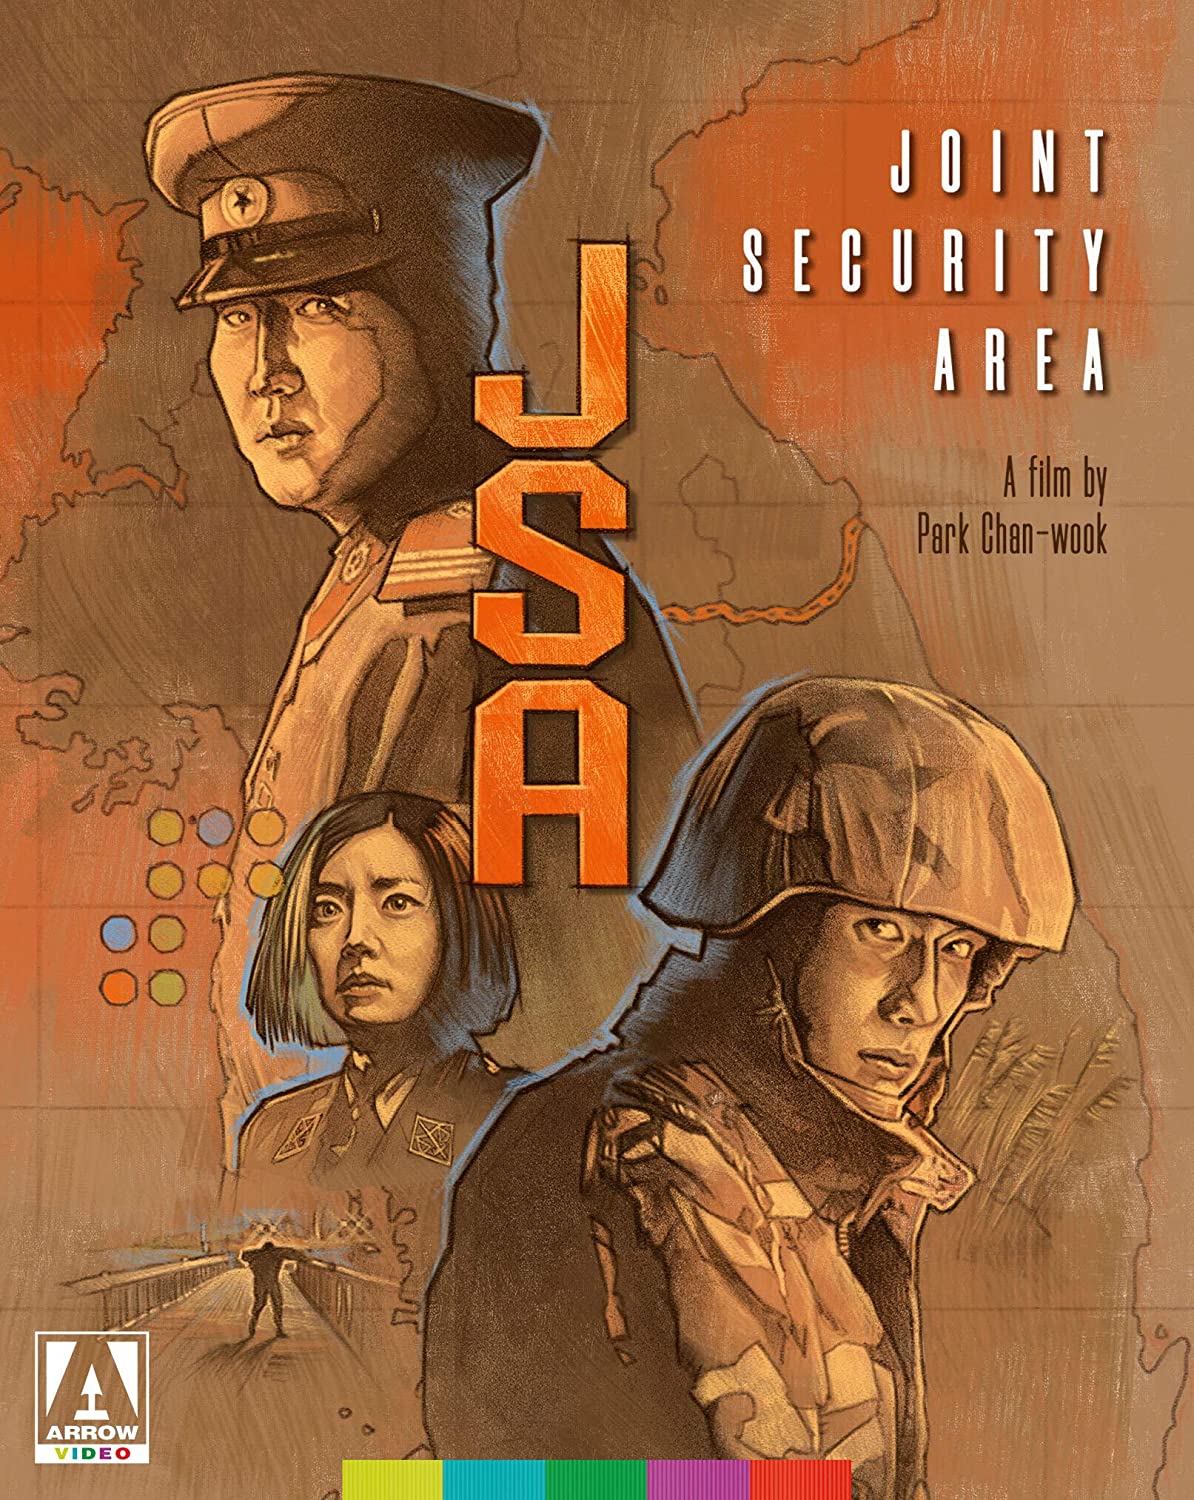 JSA - Joint Security Area [Bluray]